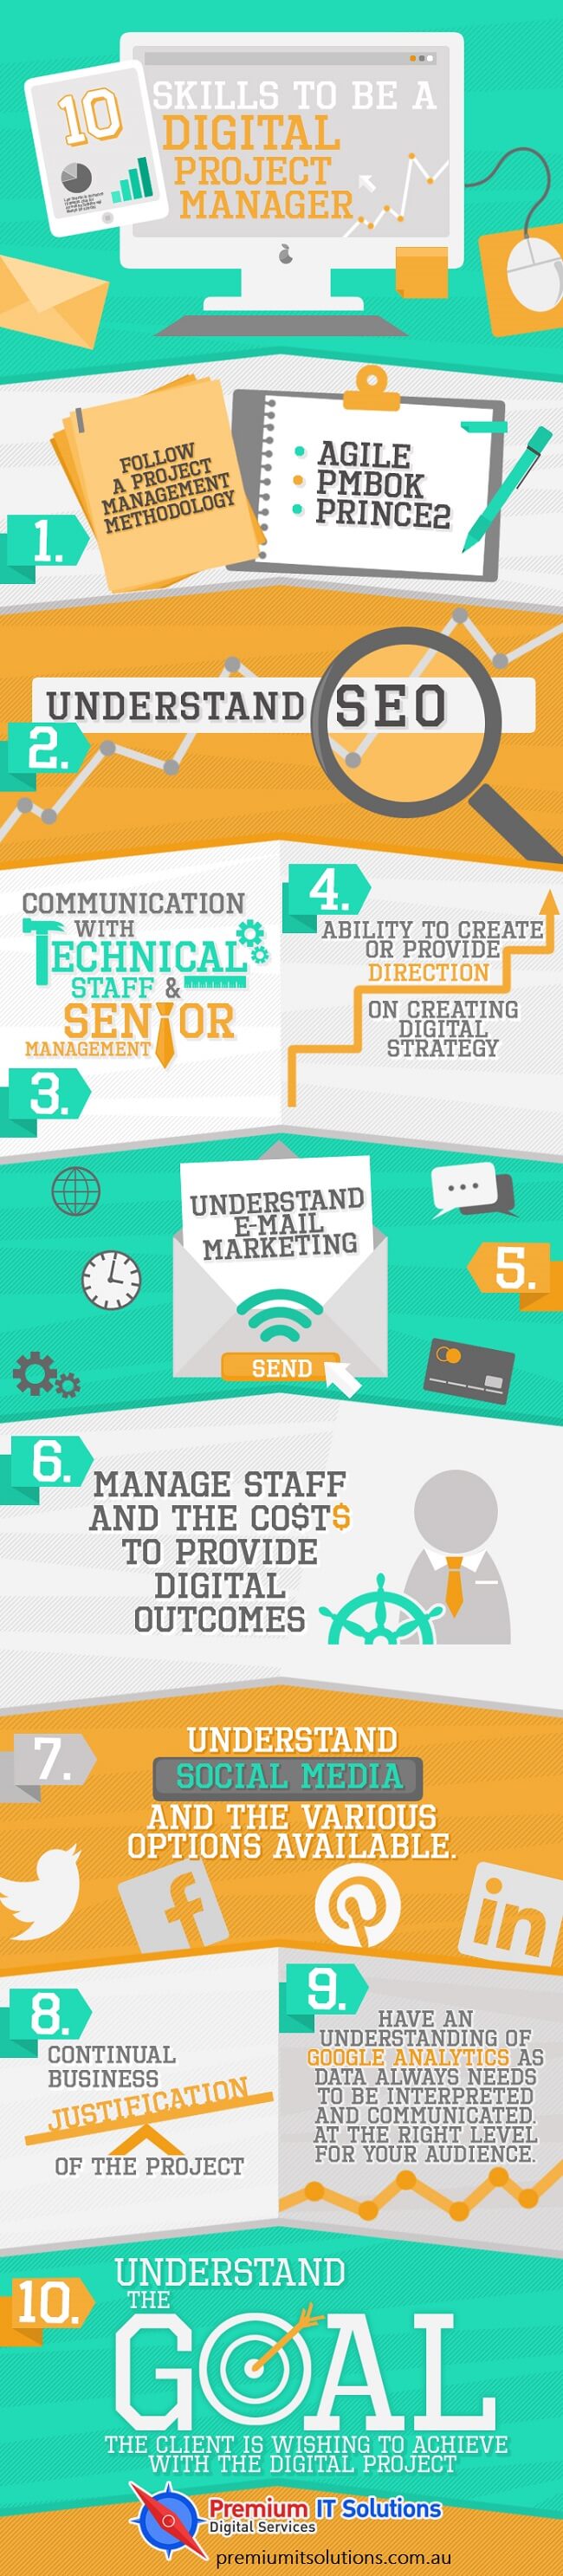 digital project manager infographic top 10 skills